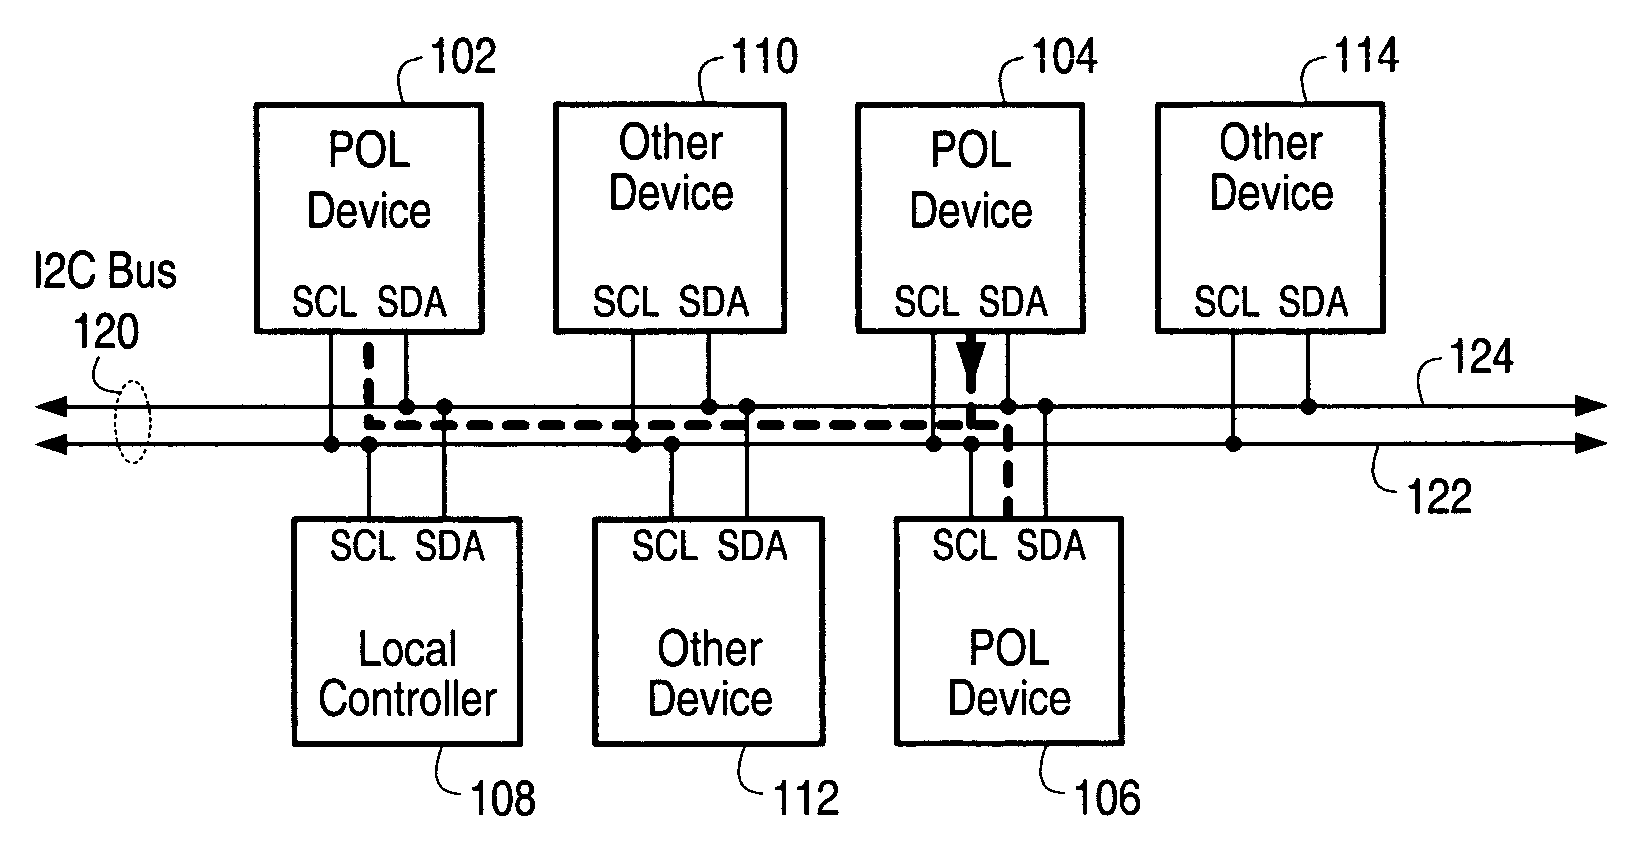 Method for using a multi-master multi-slave bus for power management